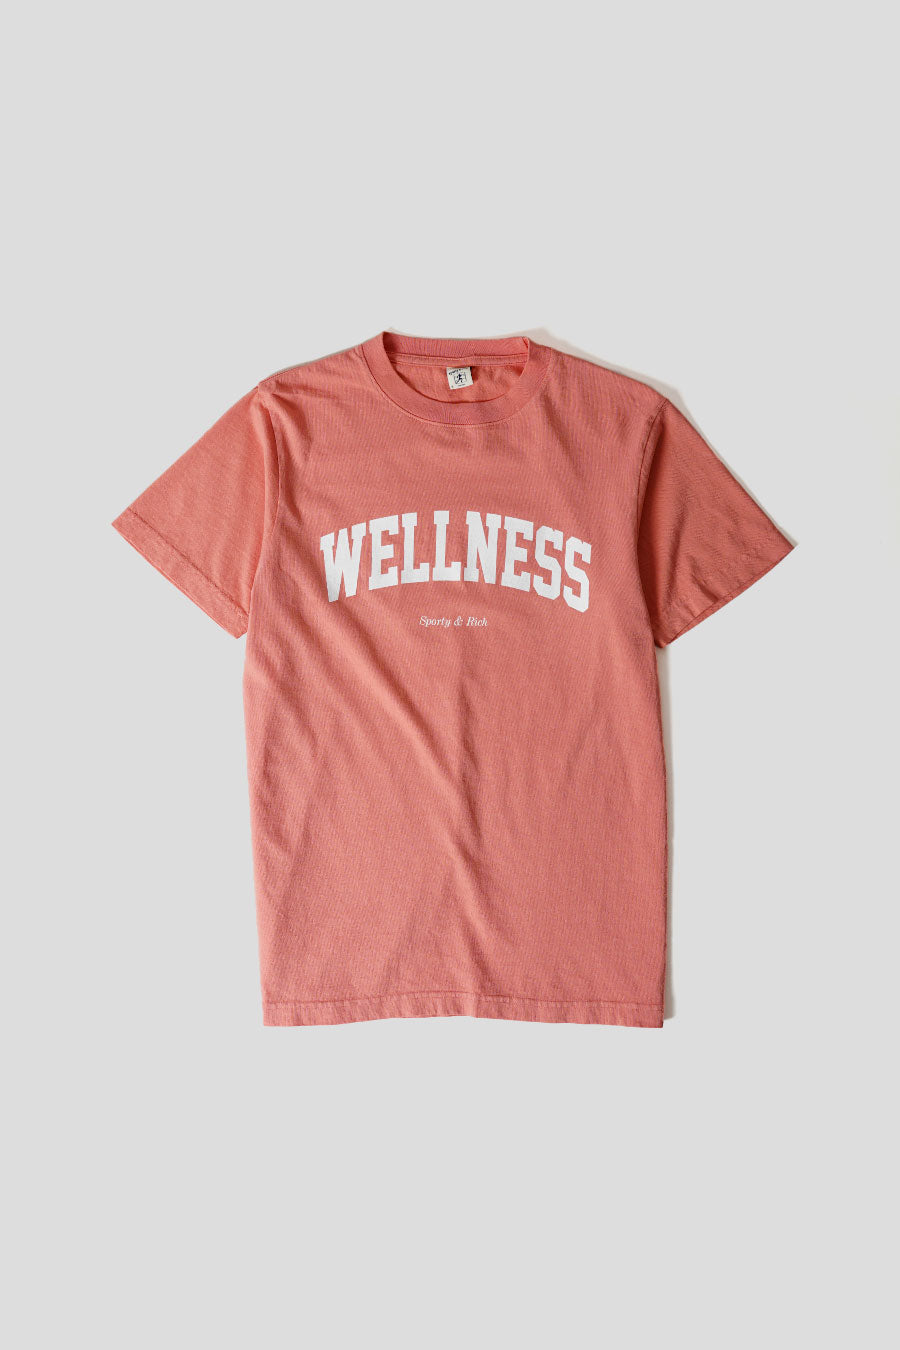 Sporty & Rich - IVY WELLNESS T-SHIRT SALMON PINK - LE LABO STORE